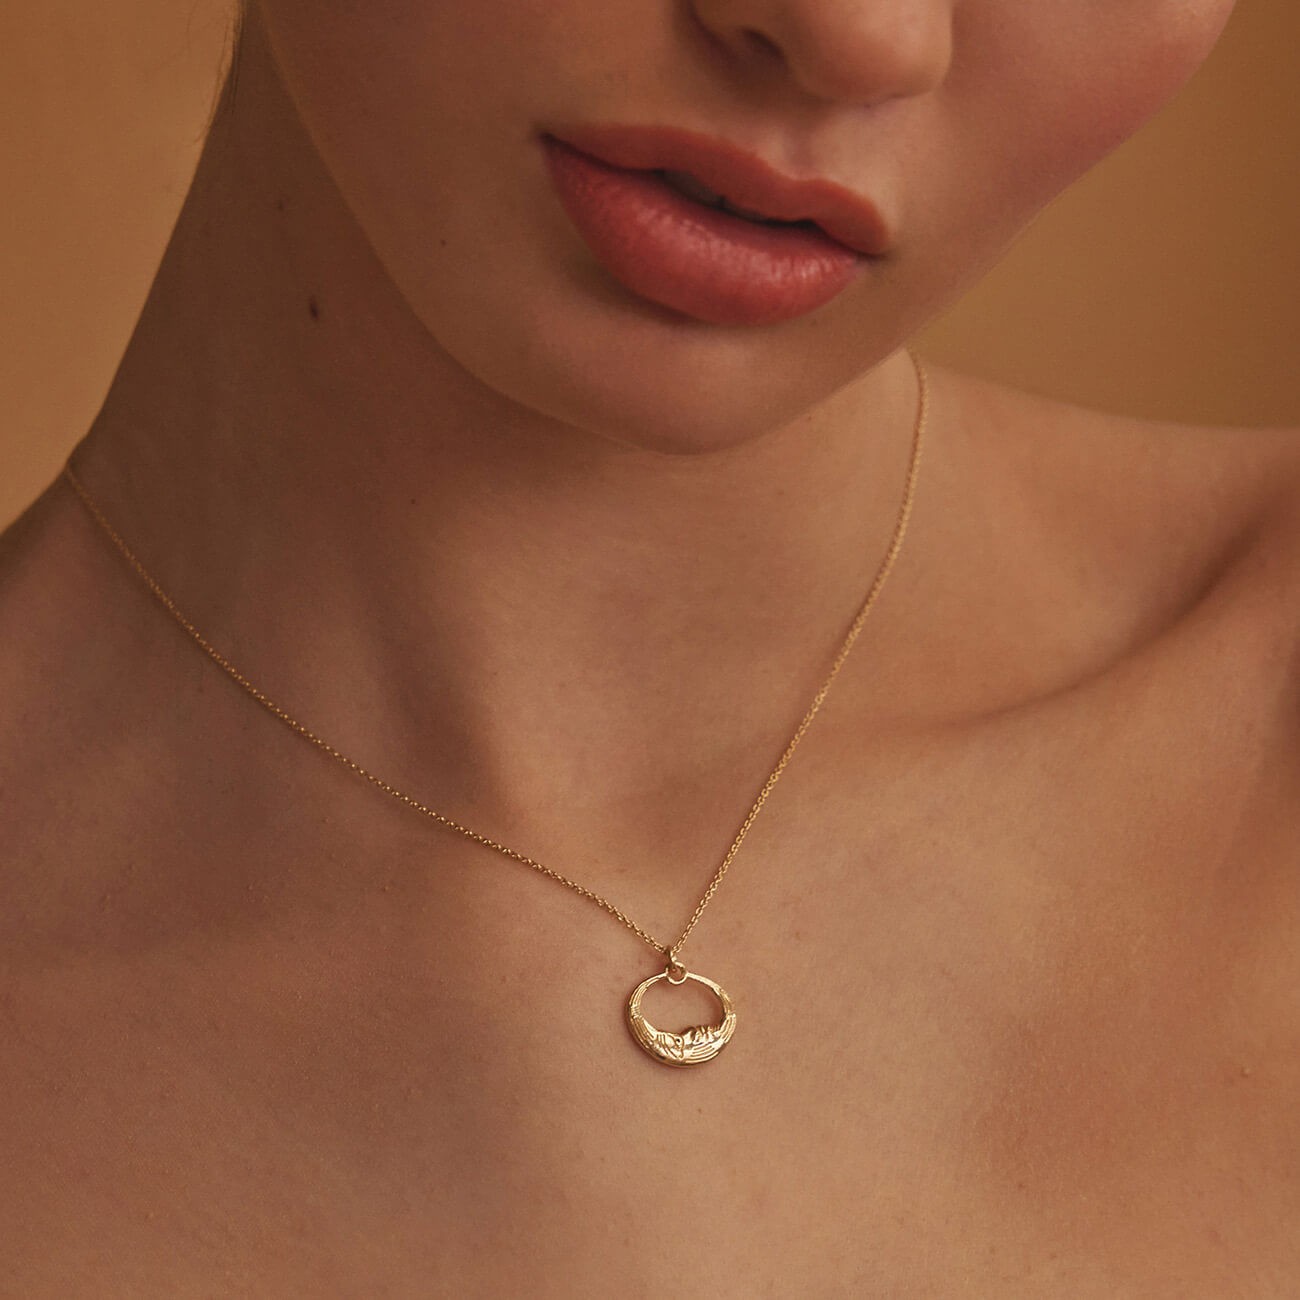 Silver moon necklace, AUGUSTYNKA x GIORRE